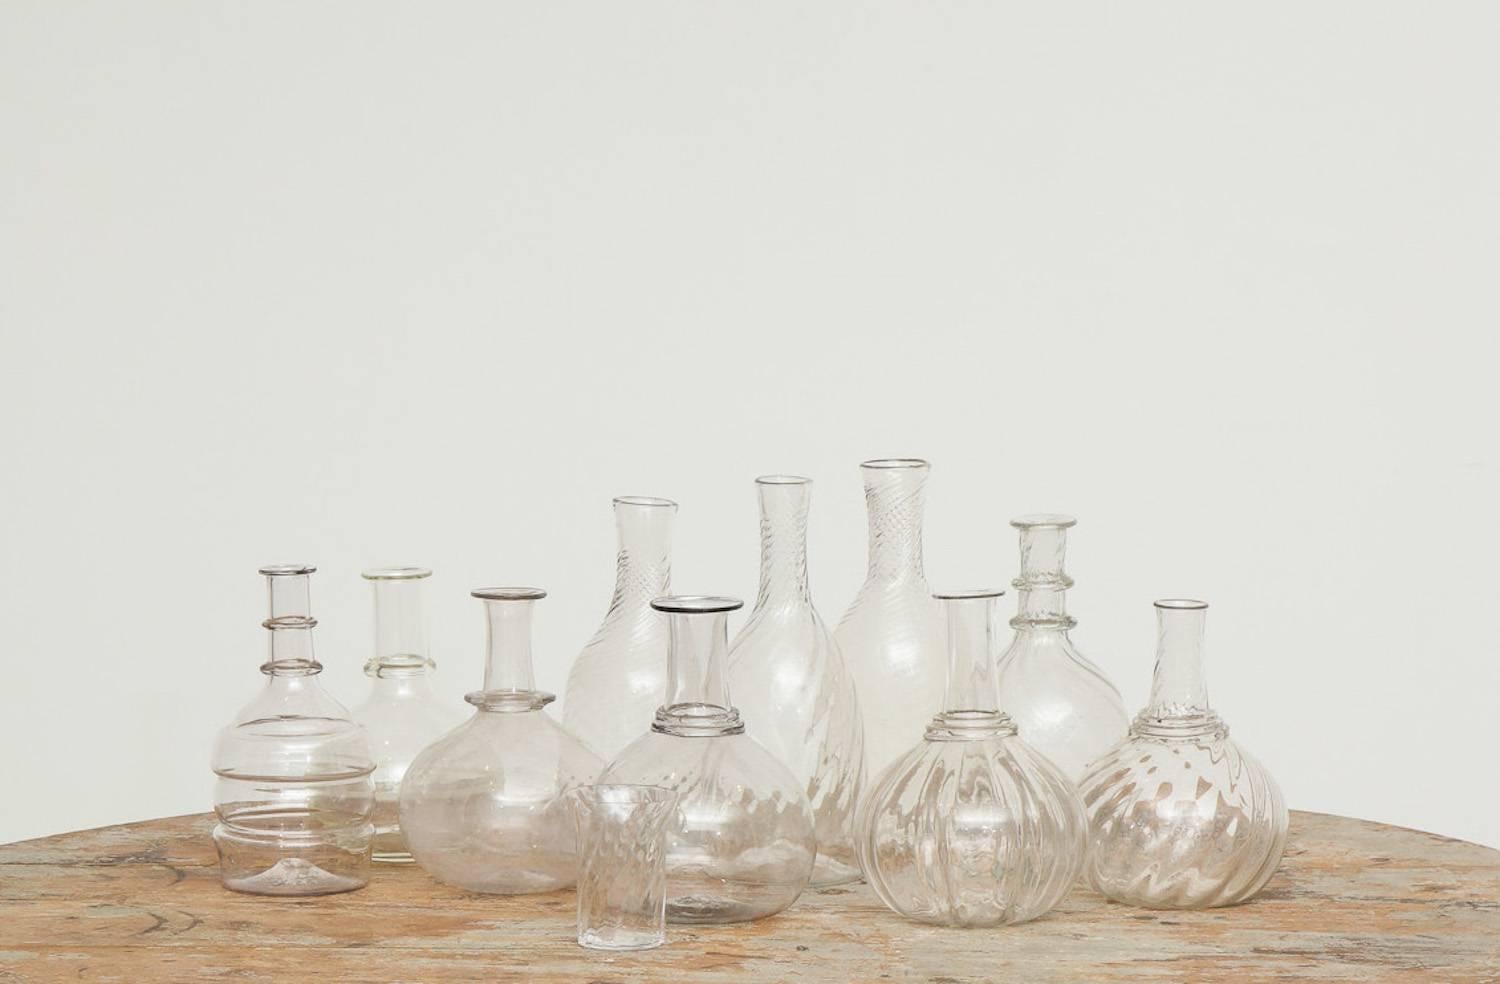 Swedish 19th century handblown turned glass carafe, origin: Sweden.

We adore these sculptural, pure, handblown glass carafes. Great objects on their own and/or added to any table setting used for wine, waters and flowers. Can never have enough of